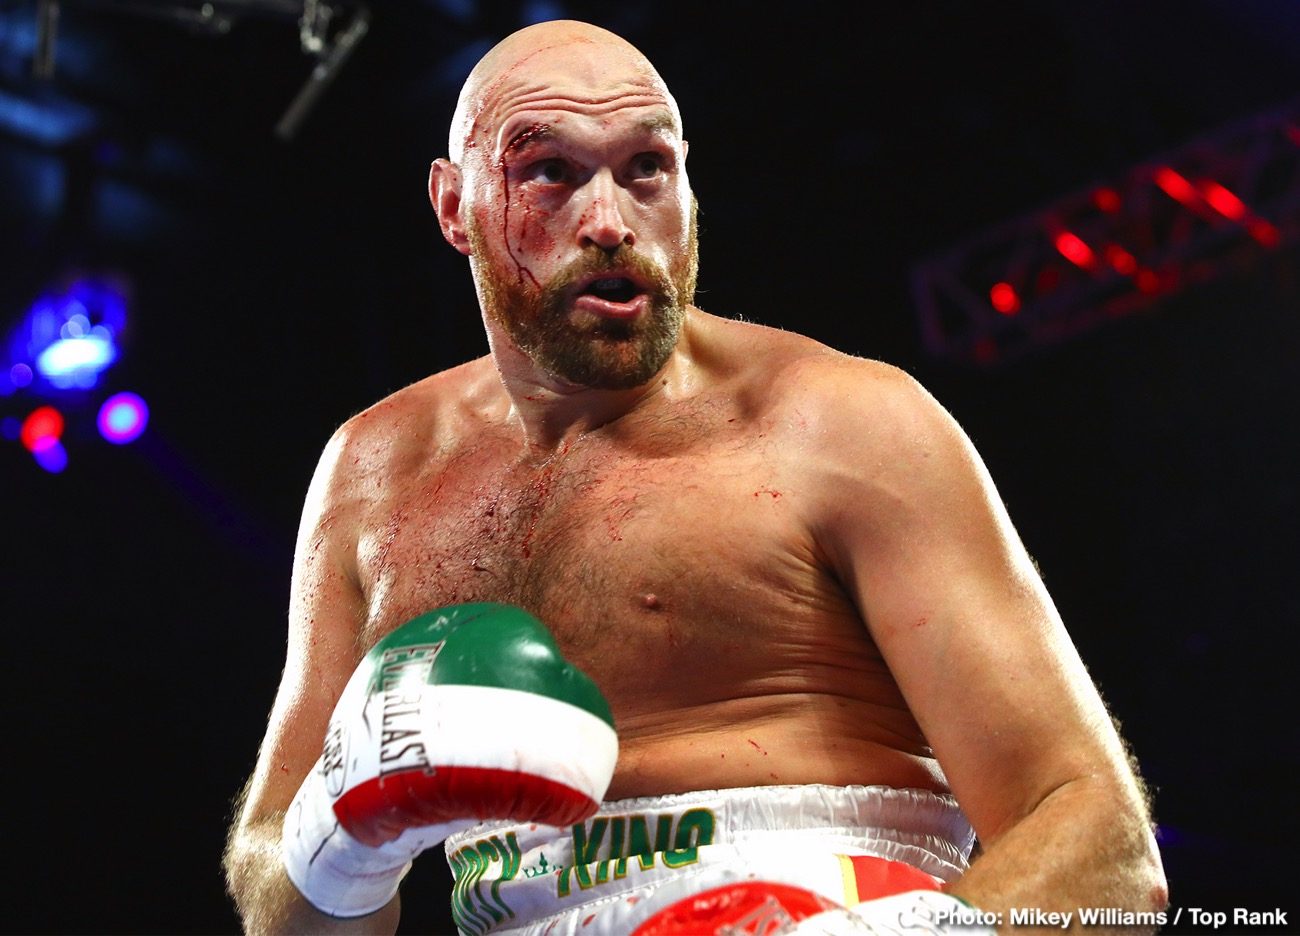 Image: Tyson Fury to Deontay Wilder: 'Don’t get injured against OLD man Luis Ortiz'